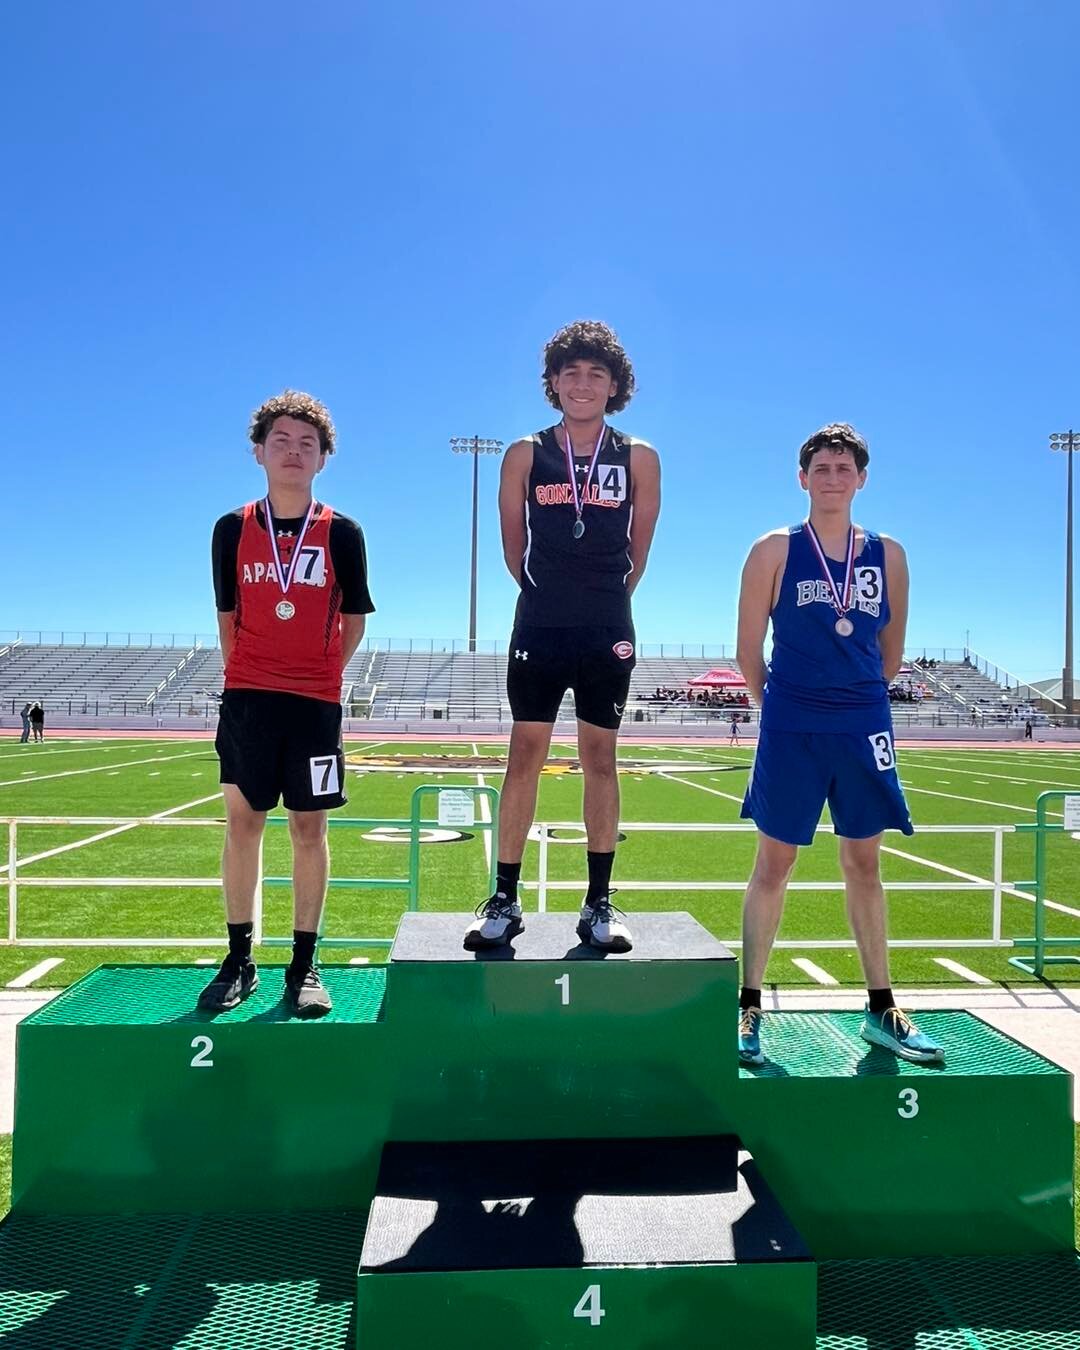 Ckristopher Ramos (4,district chamipion) and Youahi Huerta (7, district runner-up) at the podium with their medals and clinched a spot in the area meet in 3200m run.